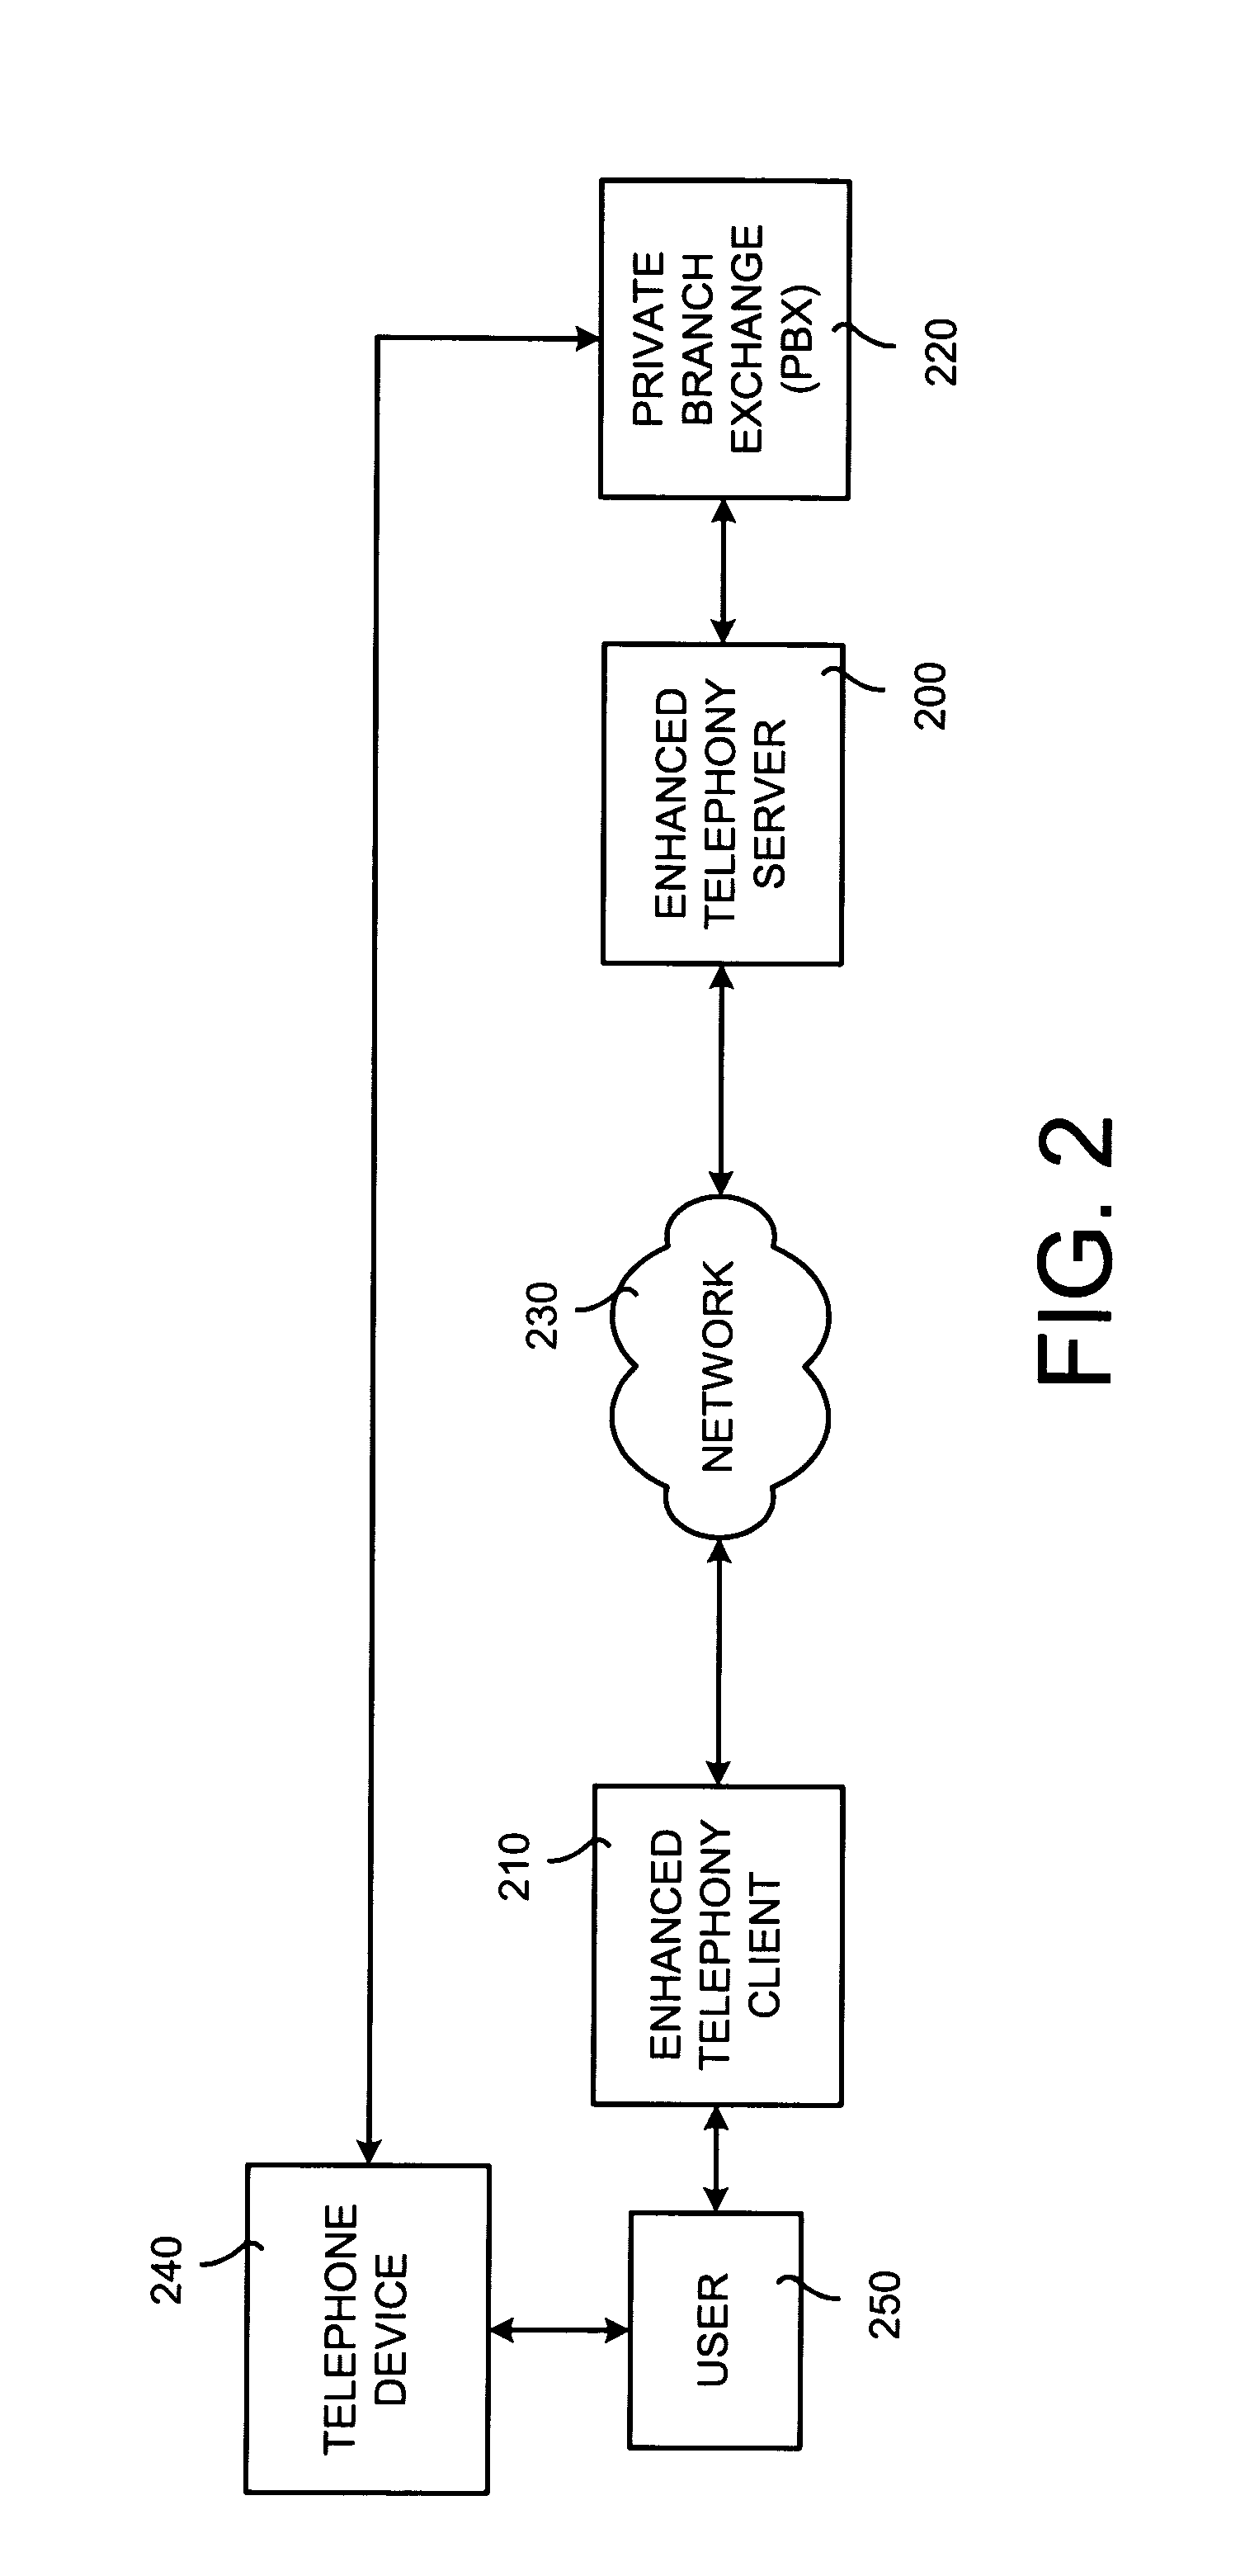 System and method for enhanced computer telephony integration and interaction